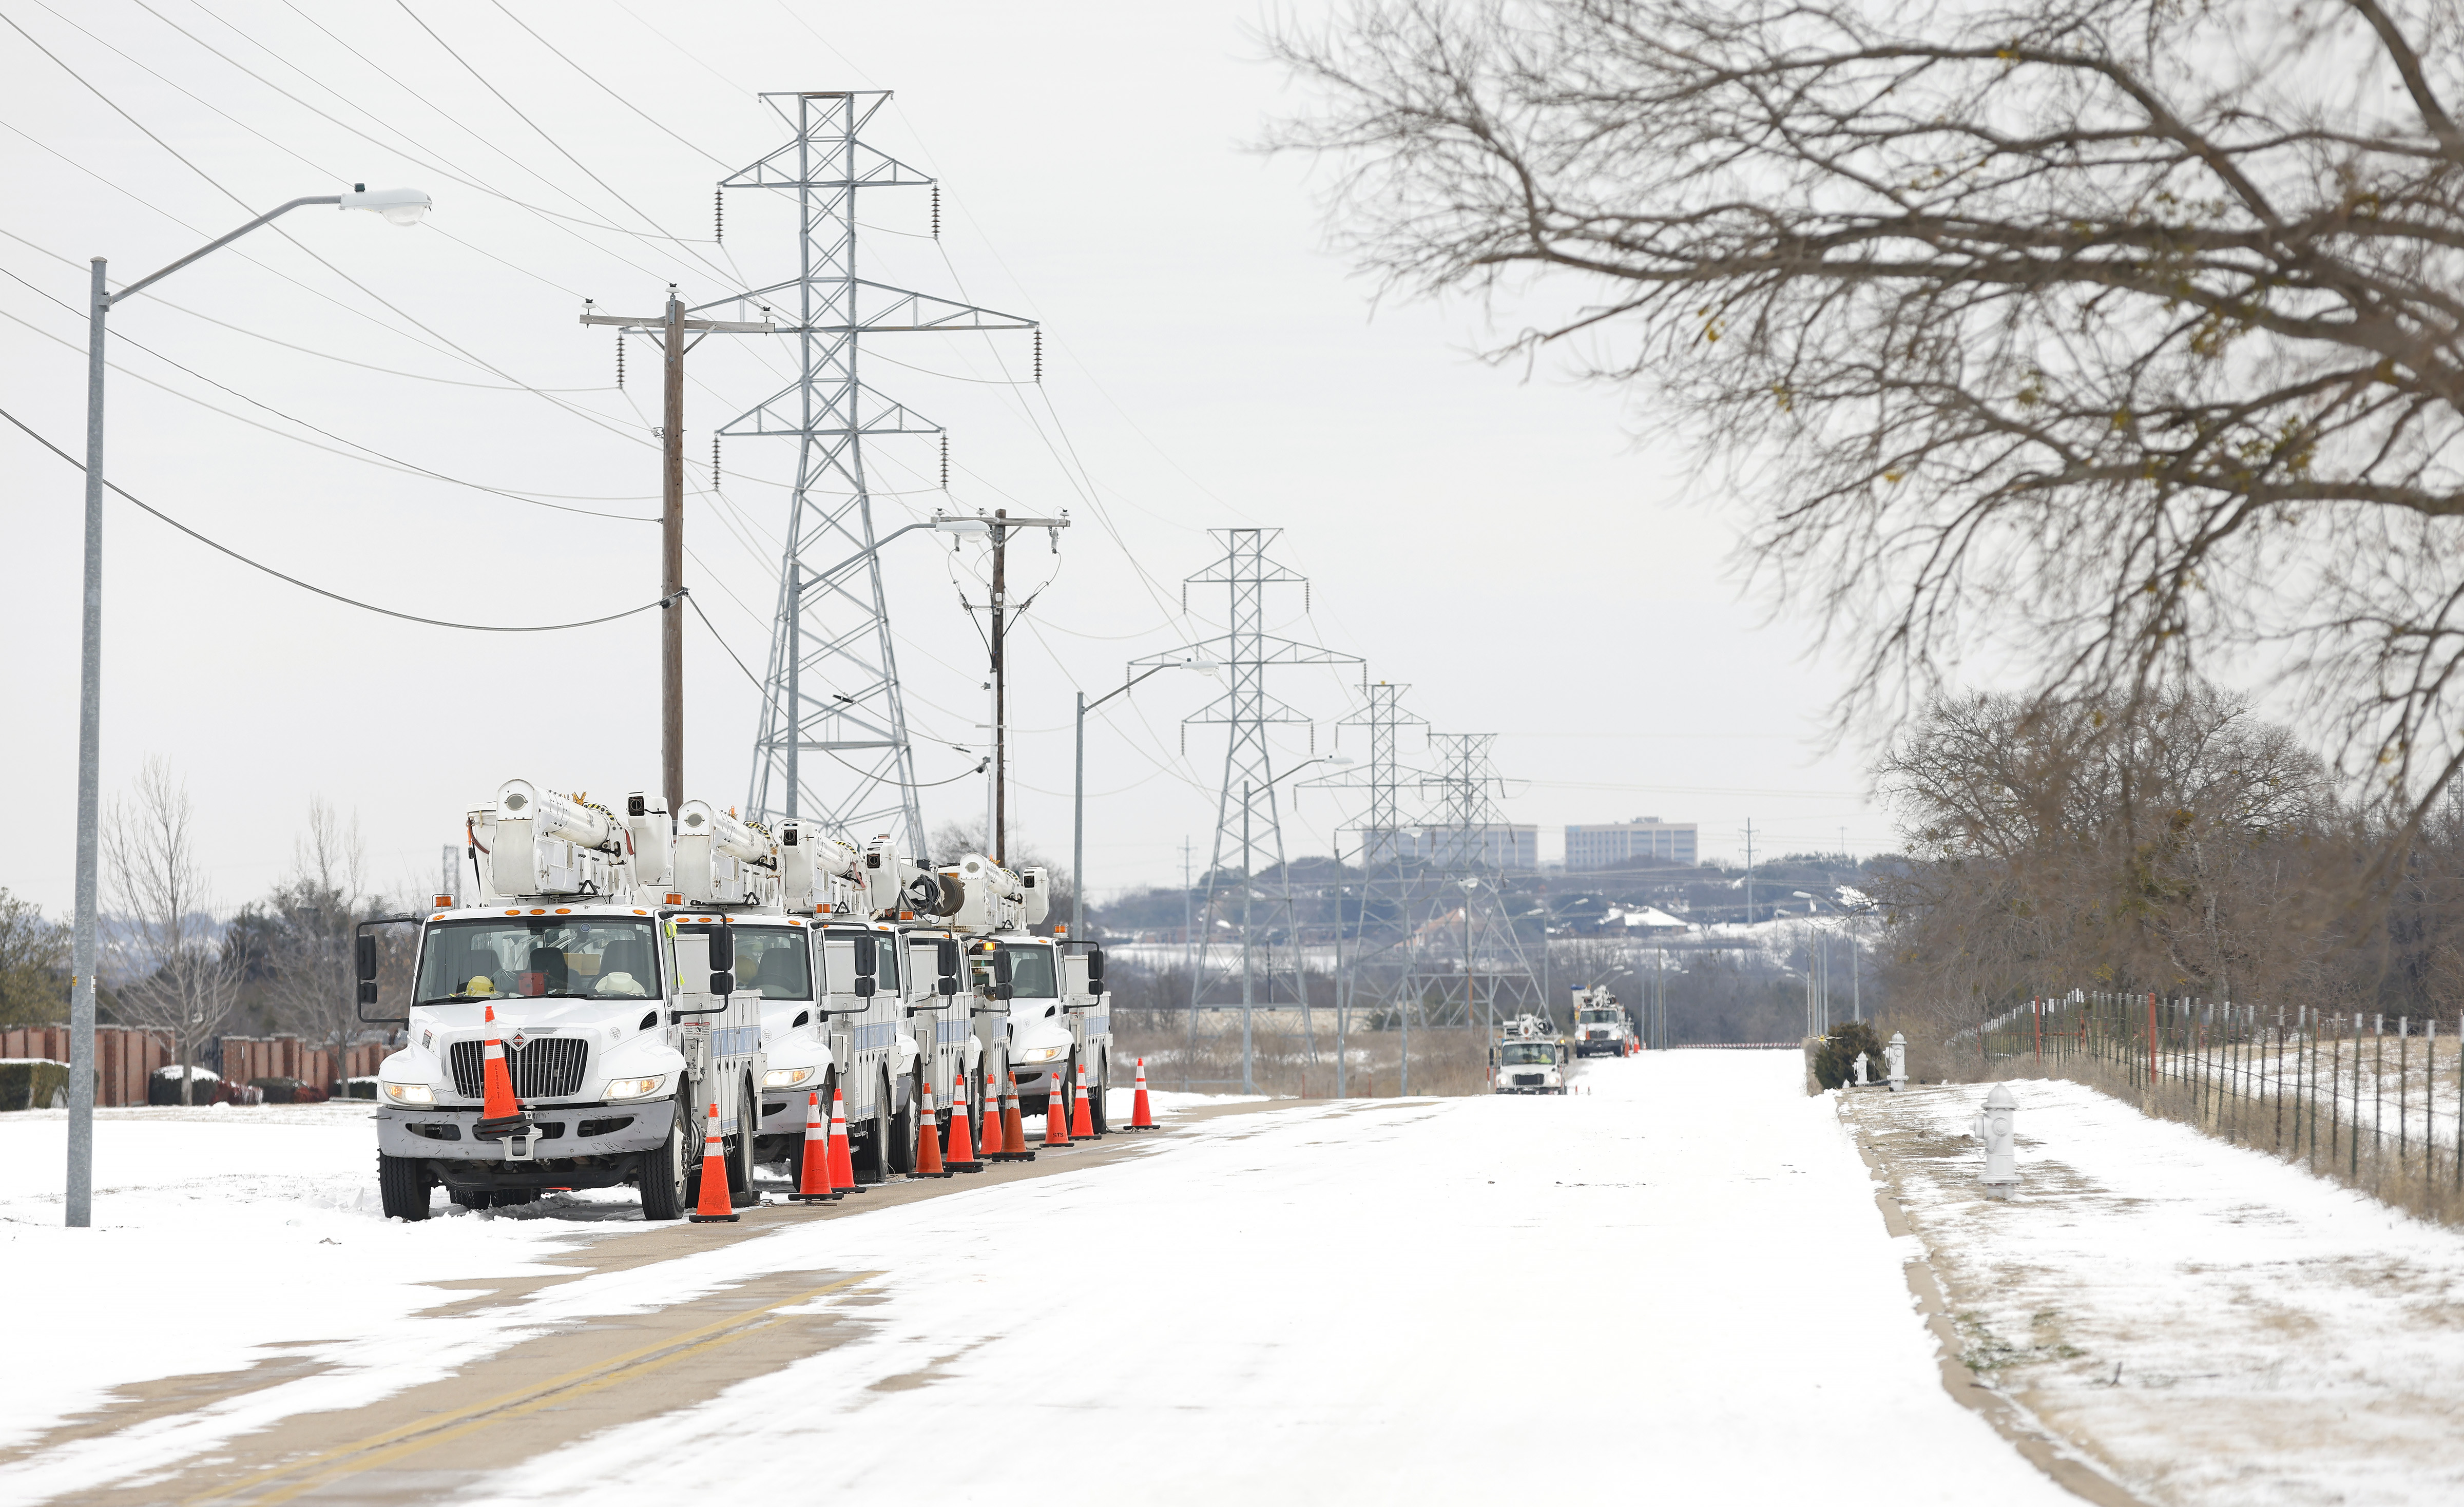 Electric utility service trucks line up after a snow storm along a snow-covered street on February 16, 2021, in Fort Worth, Texas.